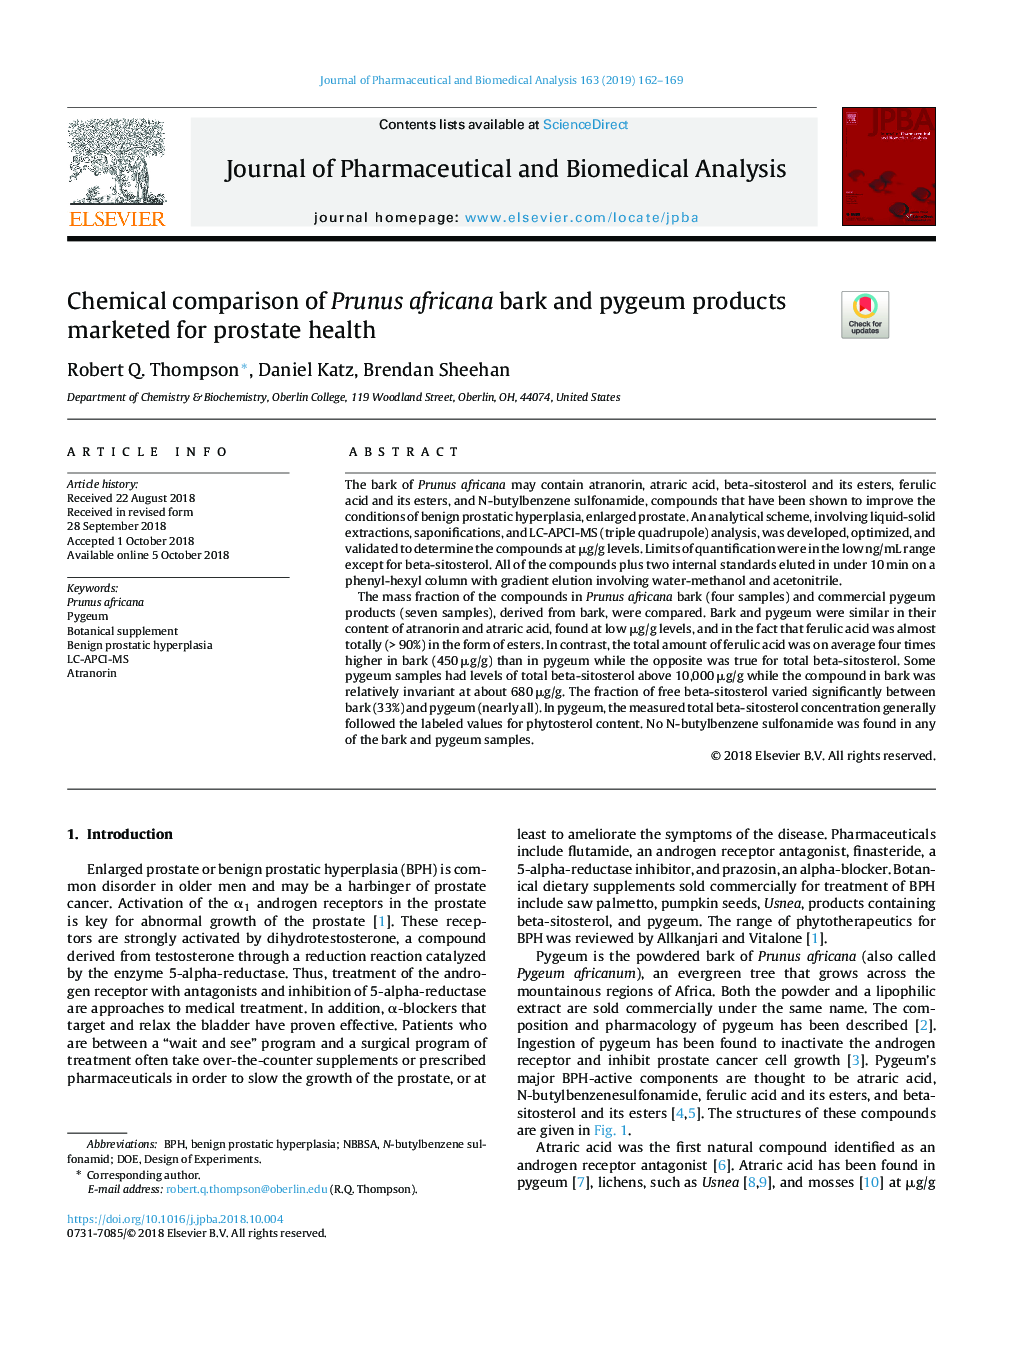 Chemical comparison of Prunus africana bark and pygeum products marketed for prostate health